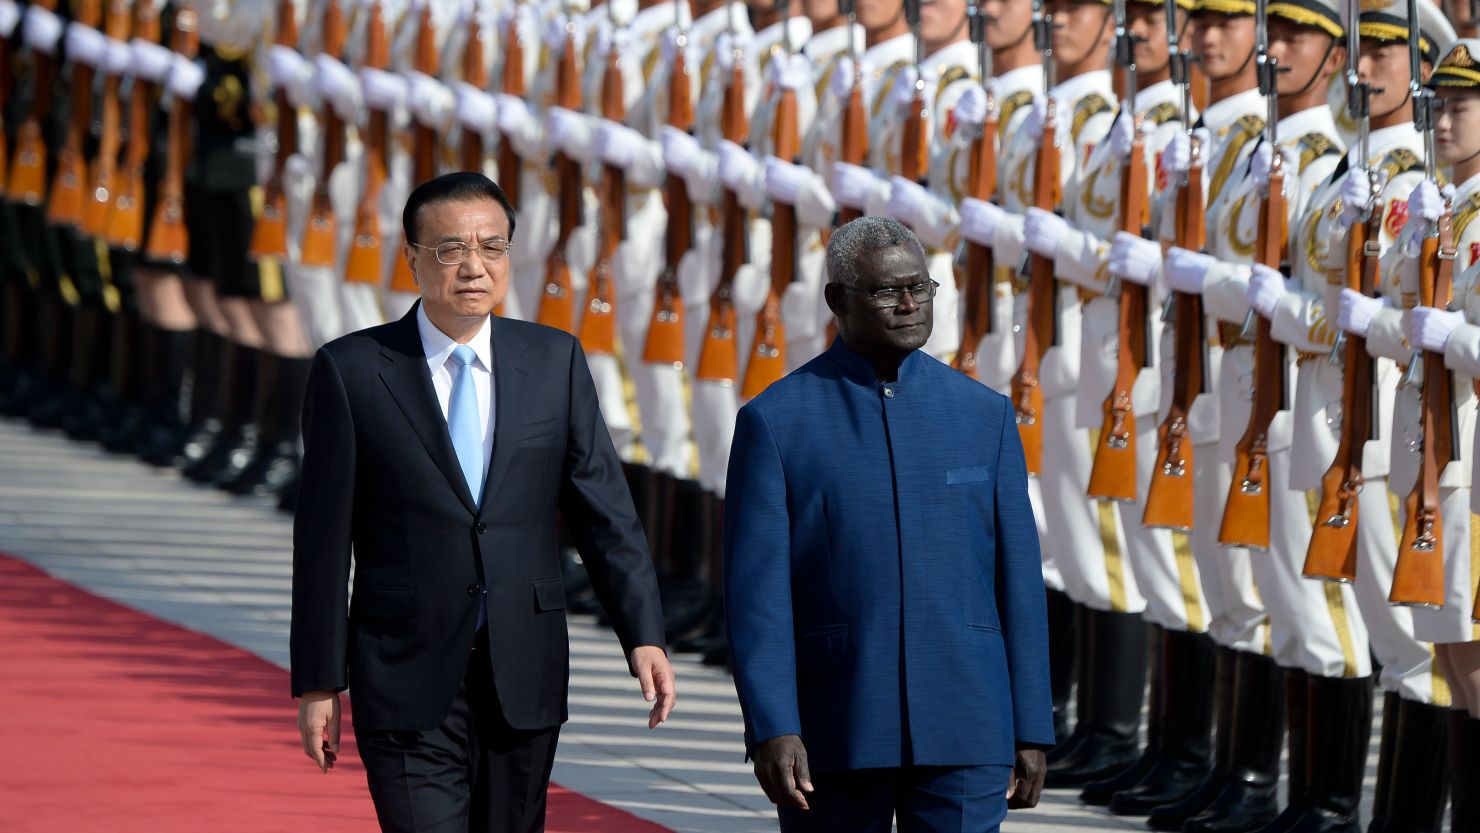 Solomon Islands Prime Minister Manasseh Sogavare and Chinese Premier Li Keqiang at the Great Hall of the People in Beijing on October 9, 2019.